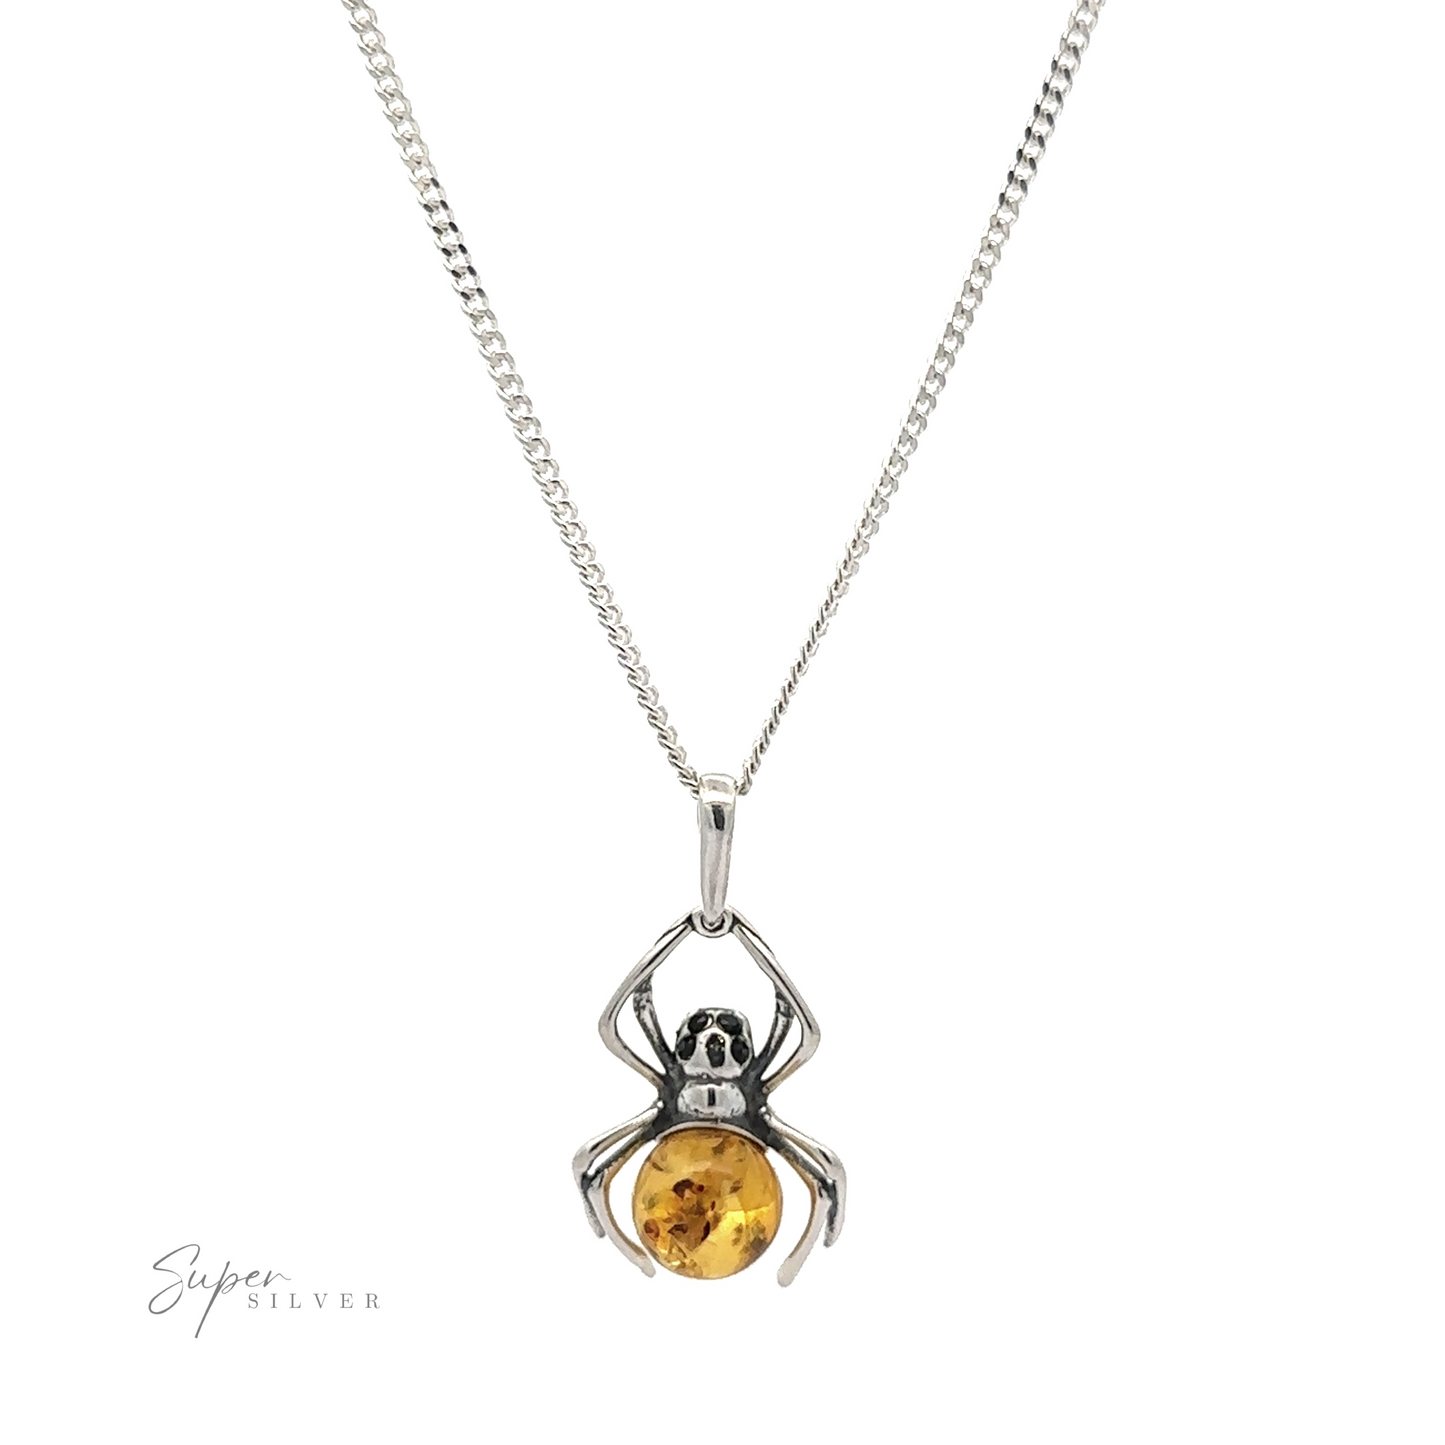 
                  
                    A silver necklace featuring a Baltic Amber Spider Pendant with Onyx Eyes, gripping a round amber stone. The spider's legs encircle the amber, giving it a unique touch of Gothic fashion, while the chain boasts a simple, elegant design.
                  
                